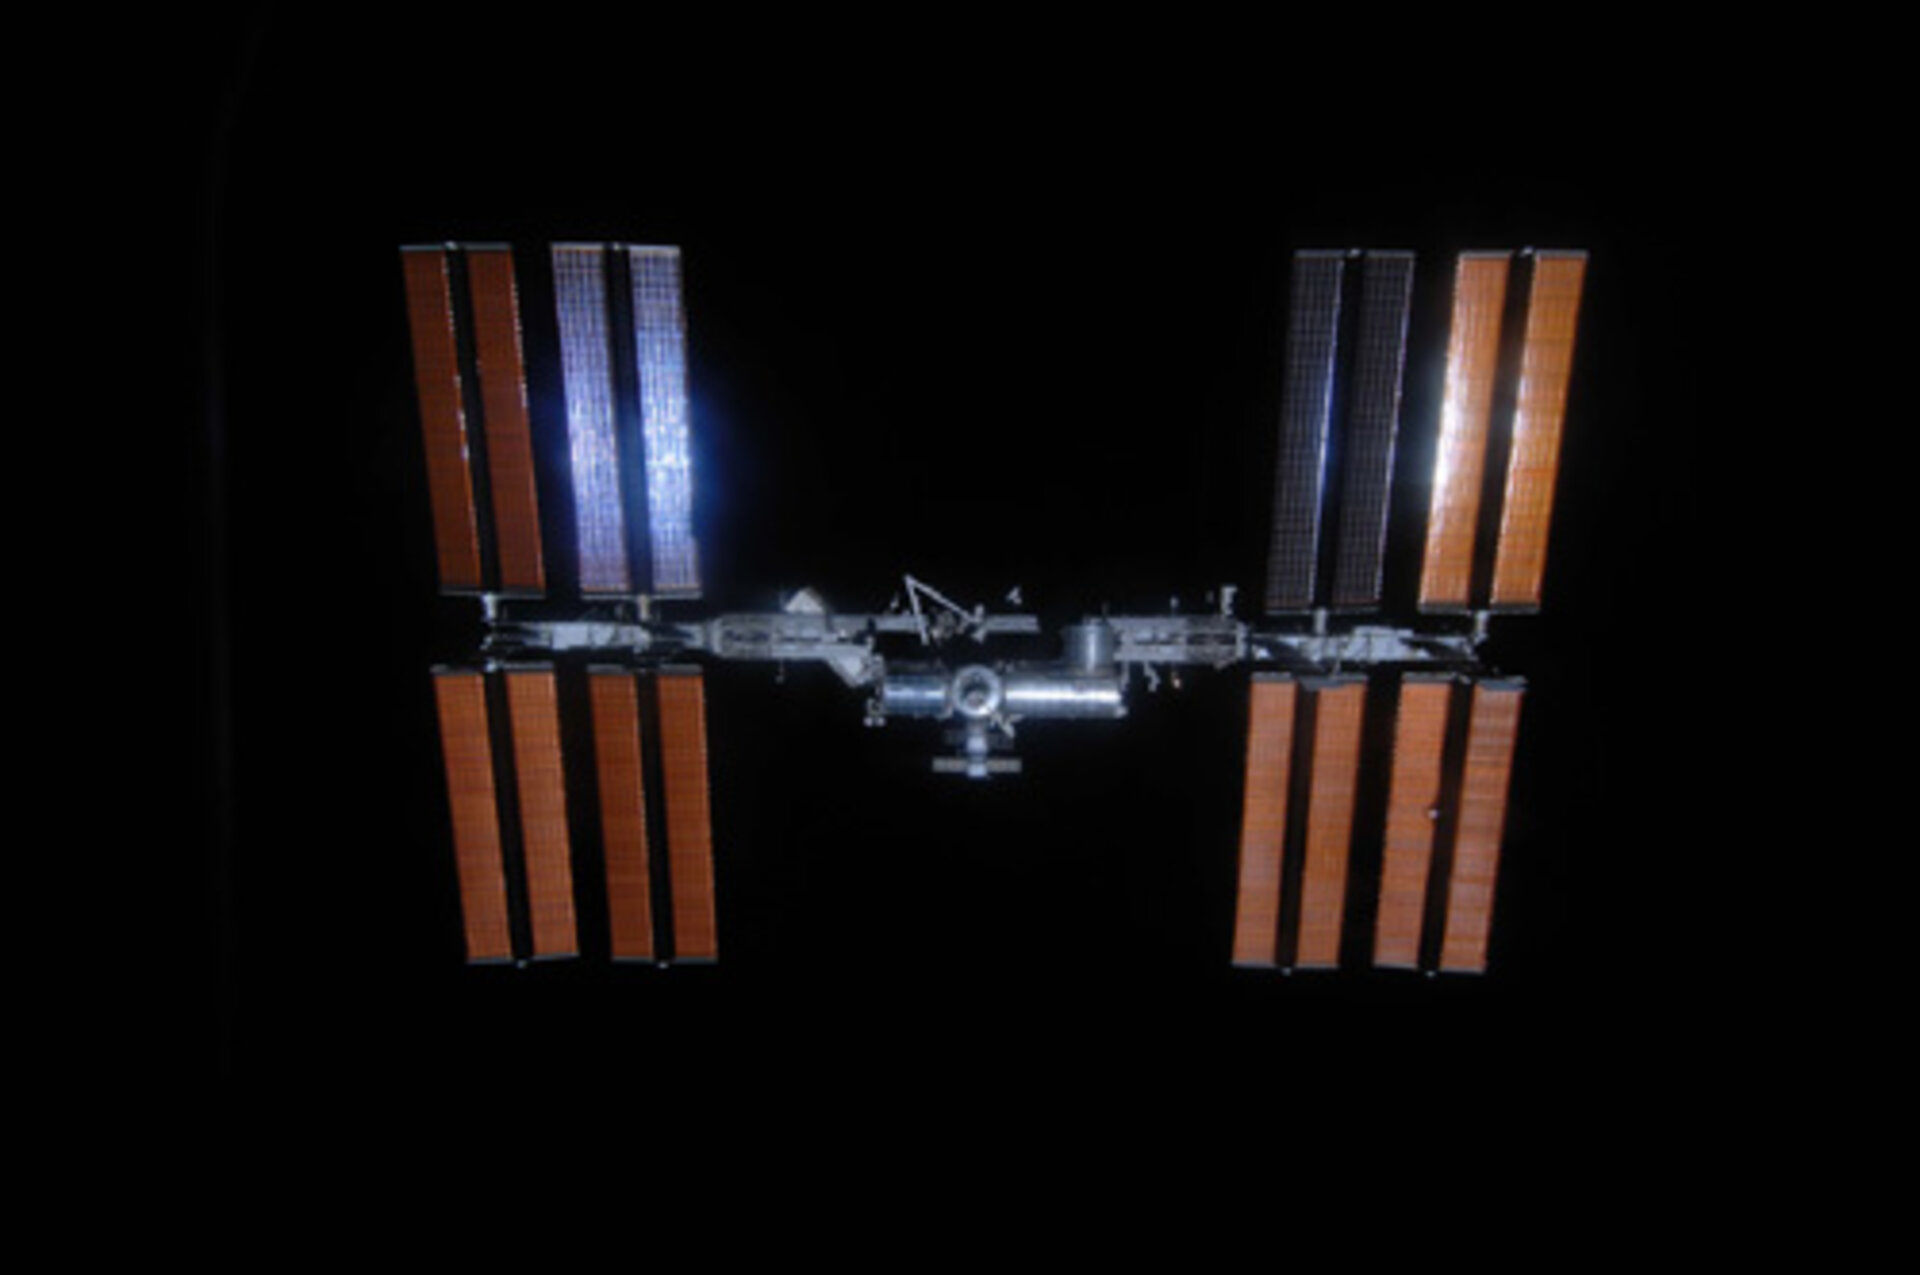 ISS after STS-128 mission